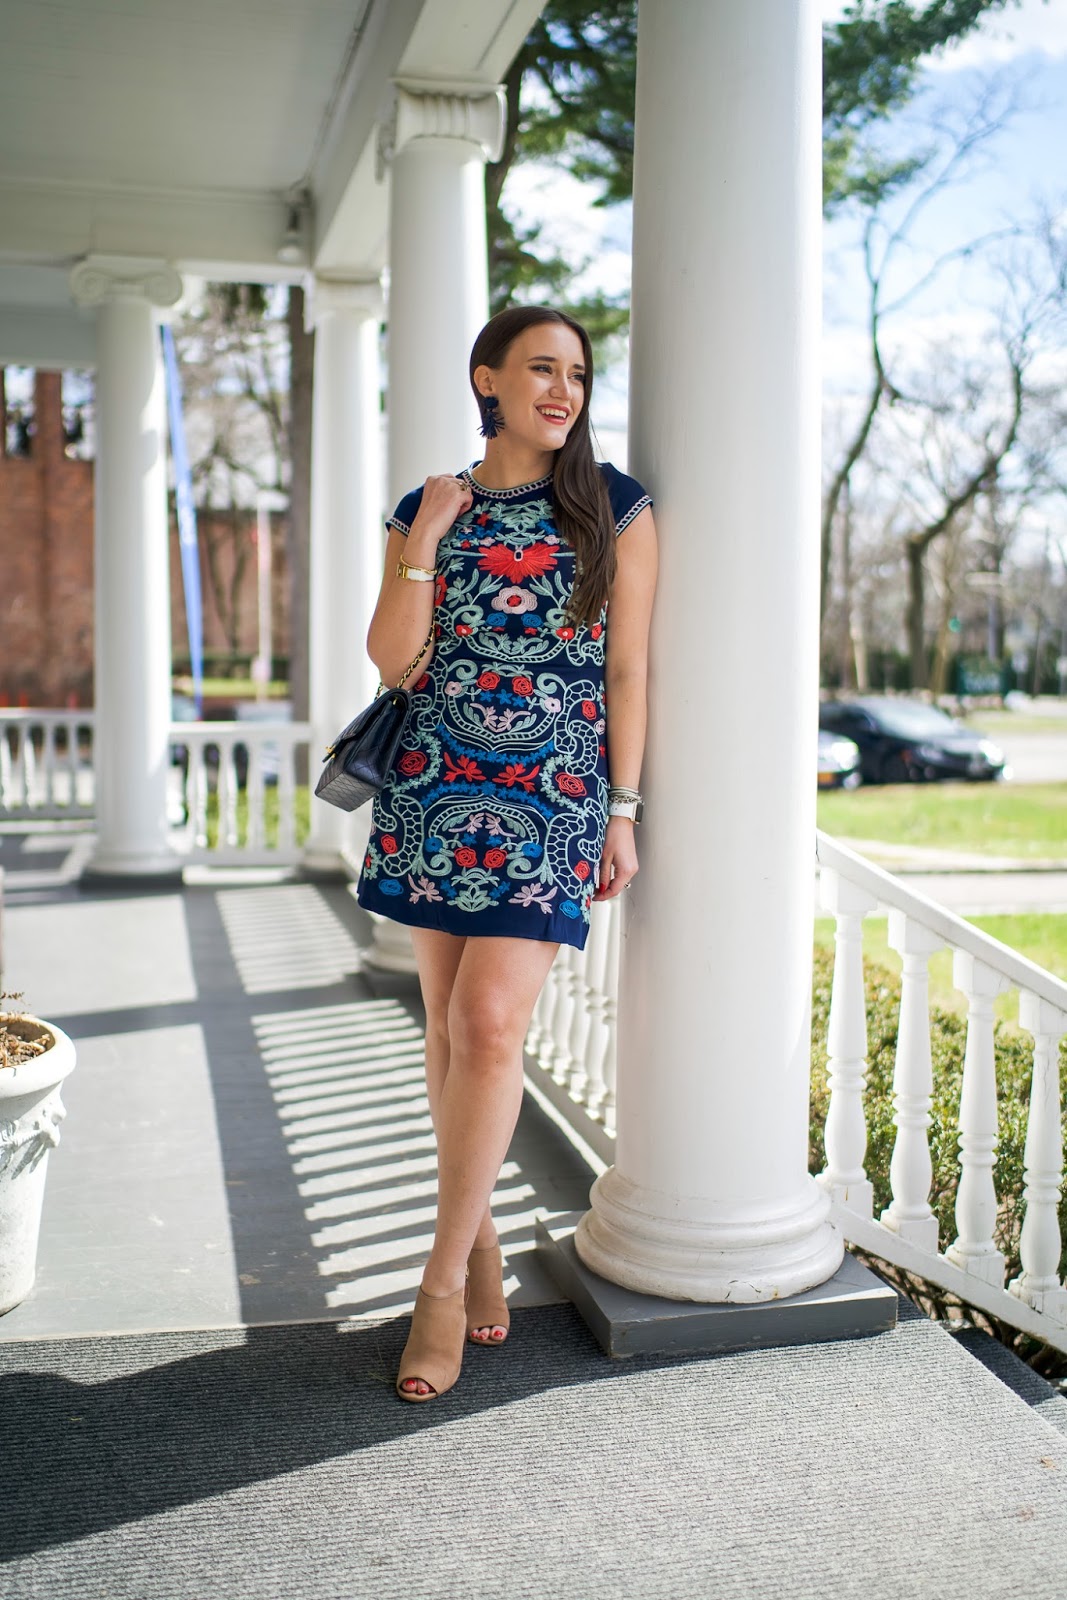 The Embroidered Dress to Make You Feel Like $100 Bill by popular New York fashion blogger Covering the Bases